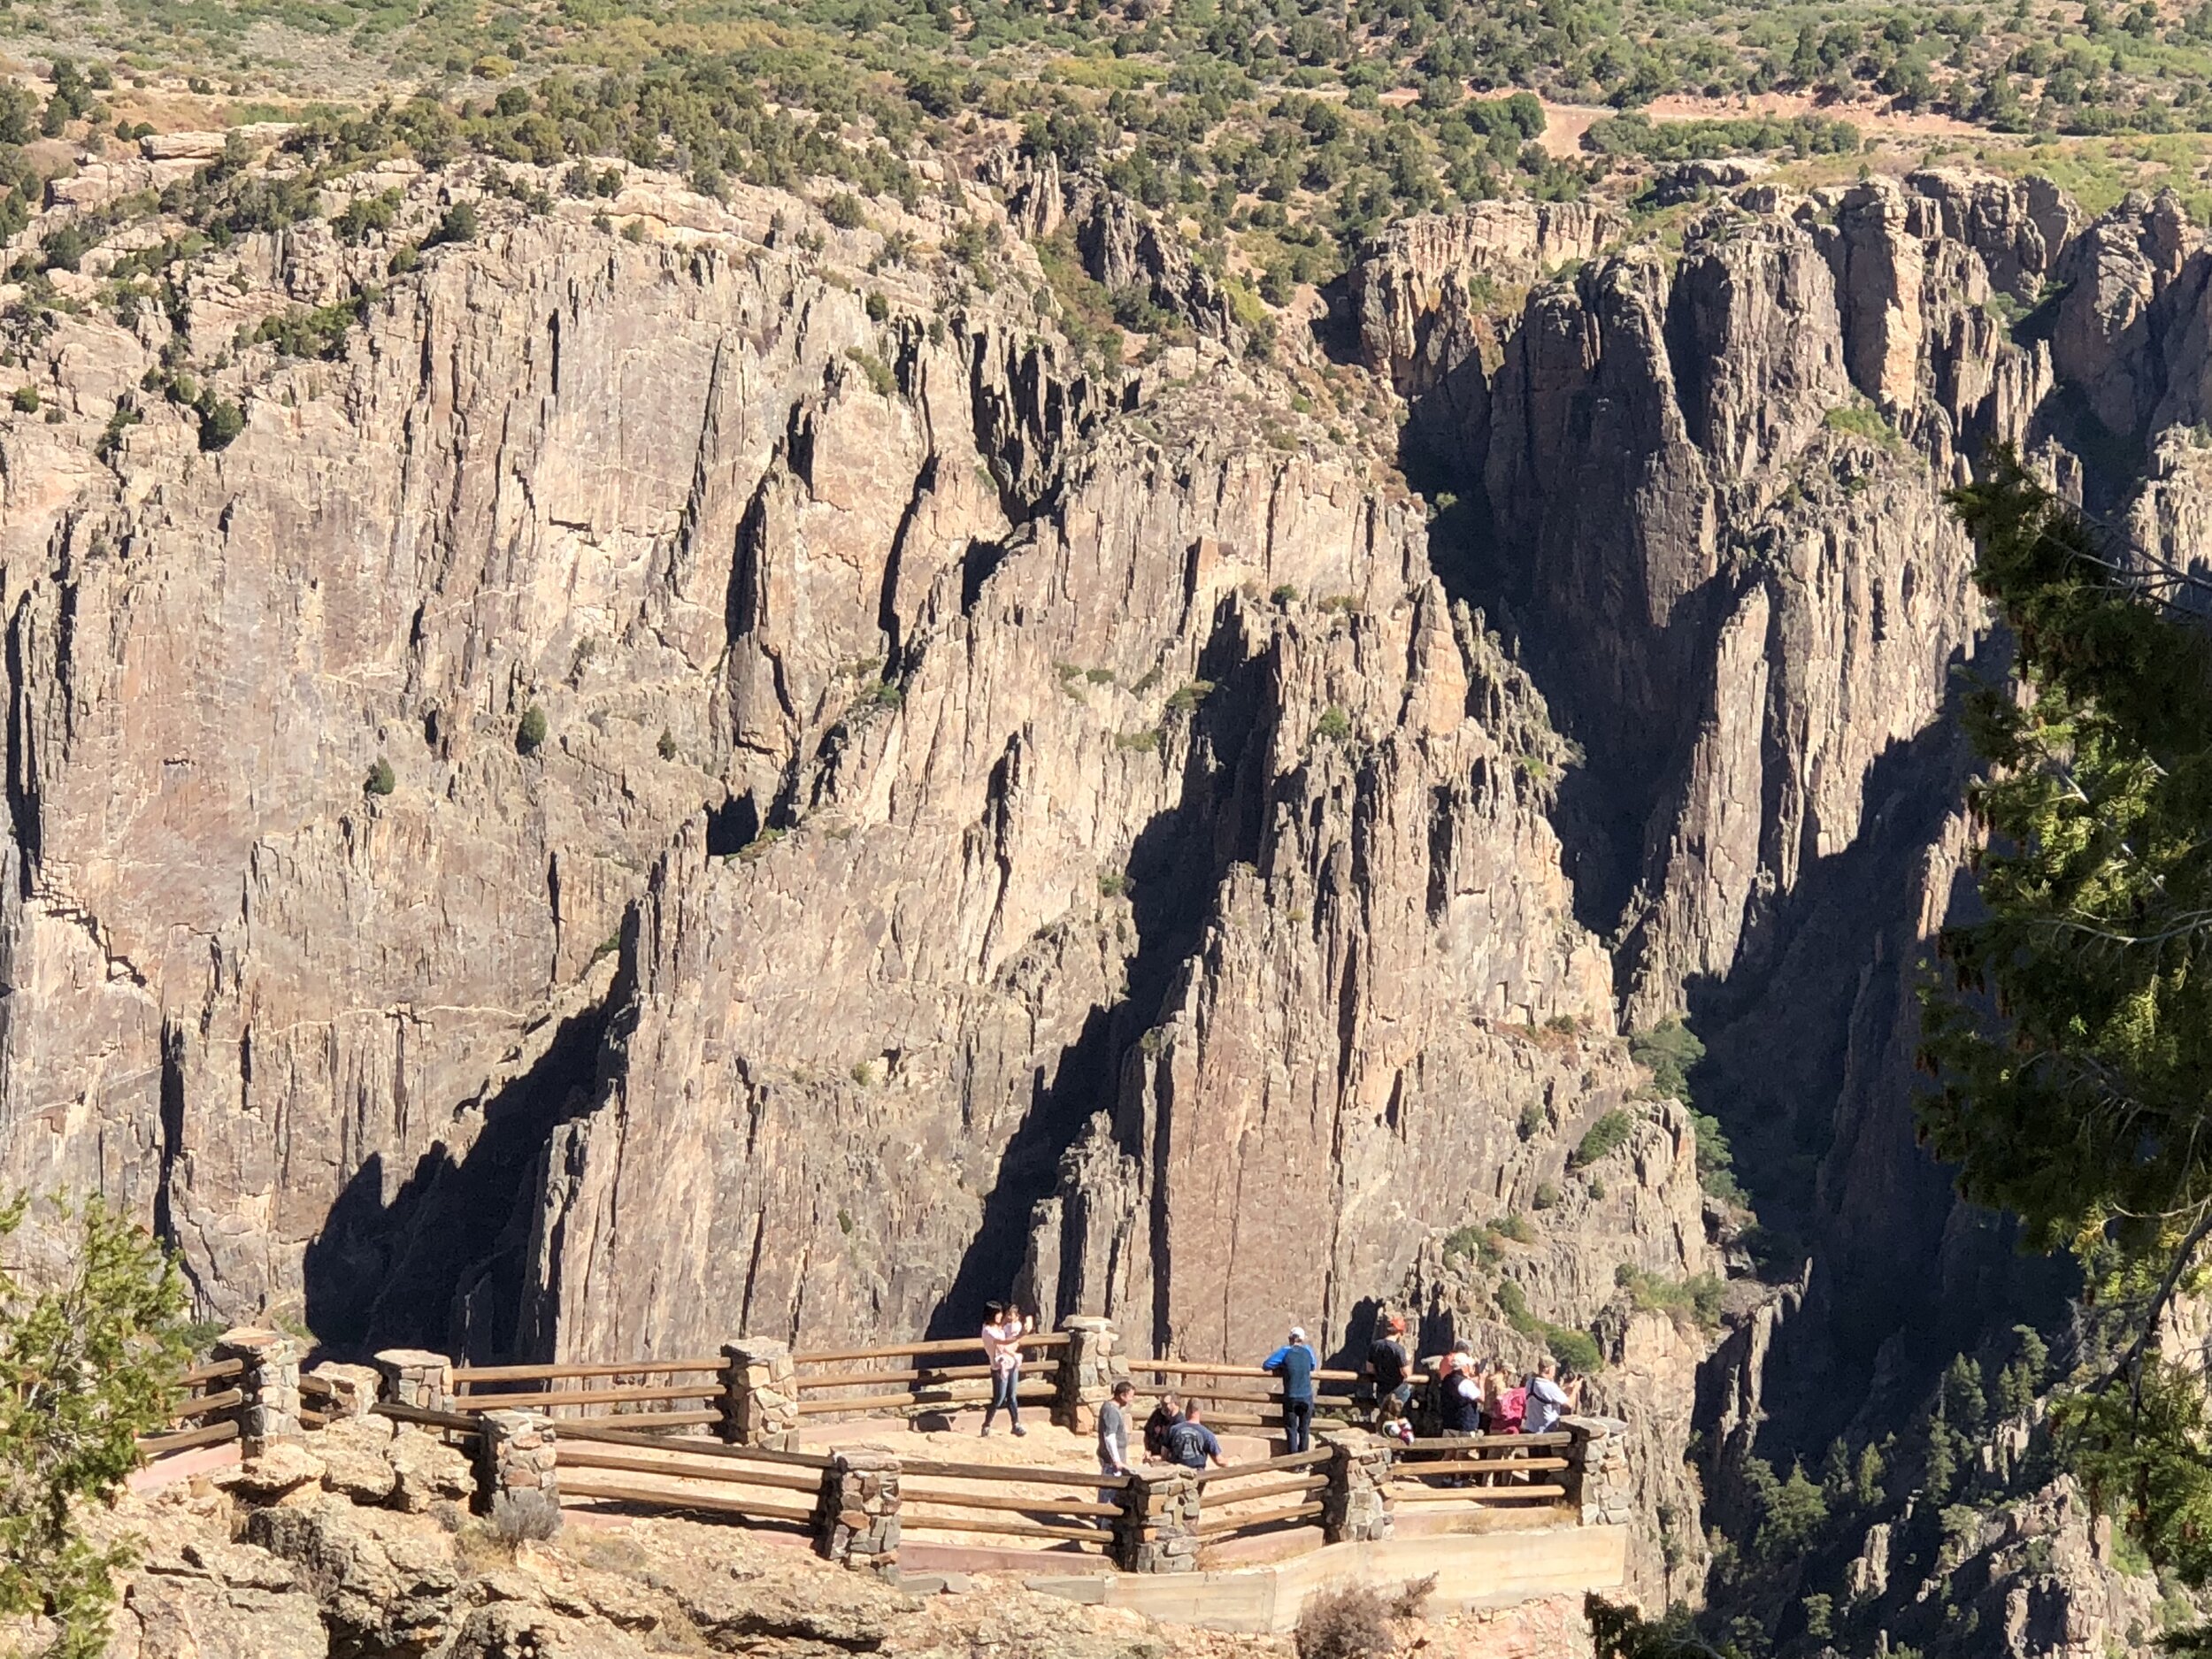 Visitors peer into the depths of the Black Canyon of the Gunnison.